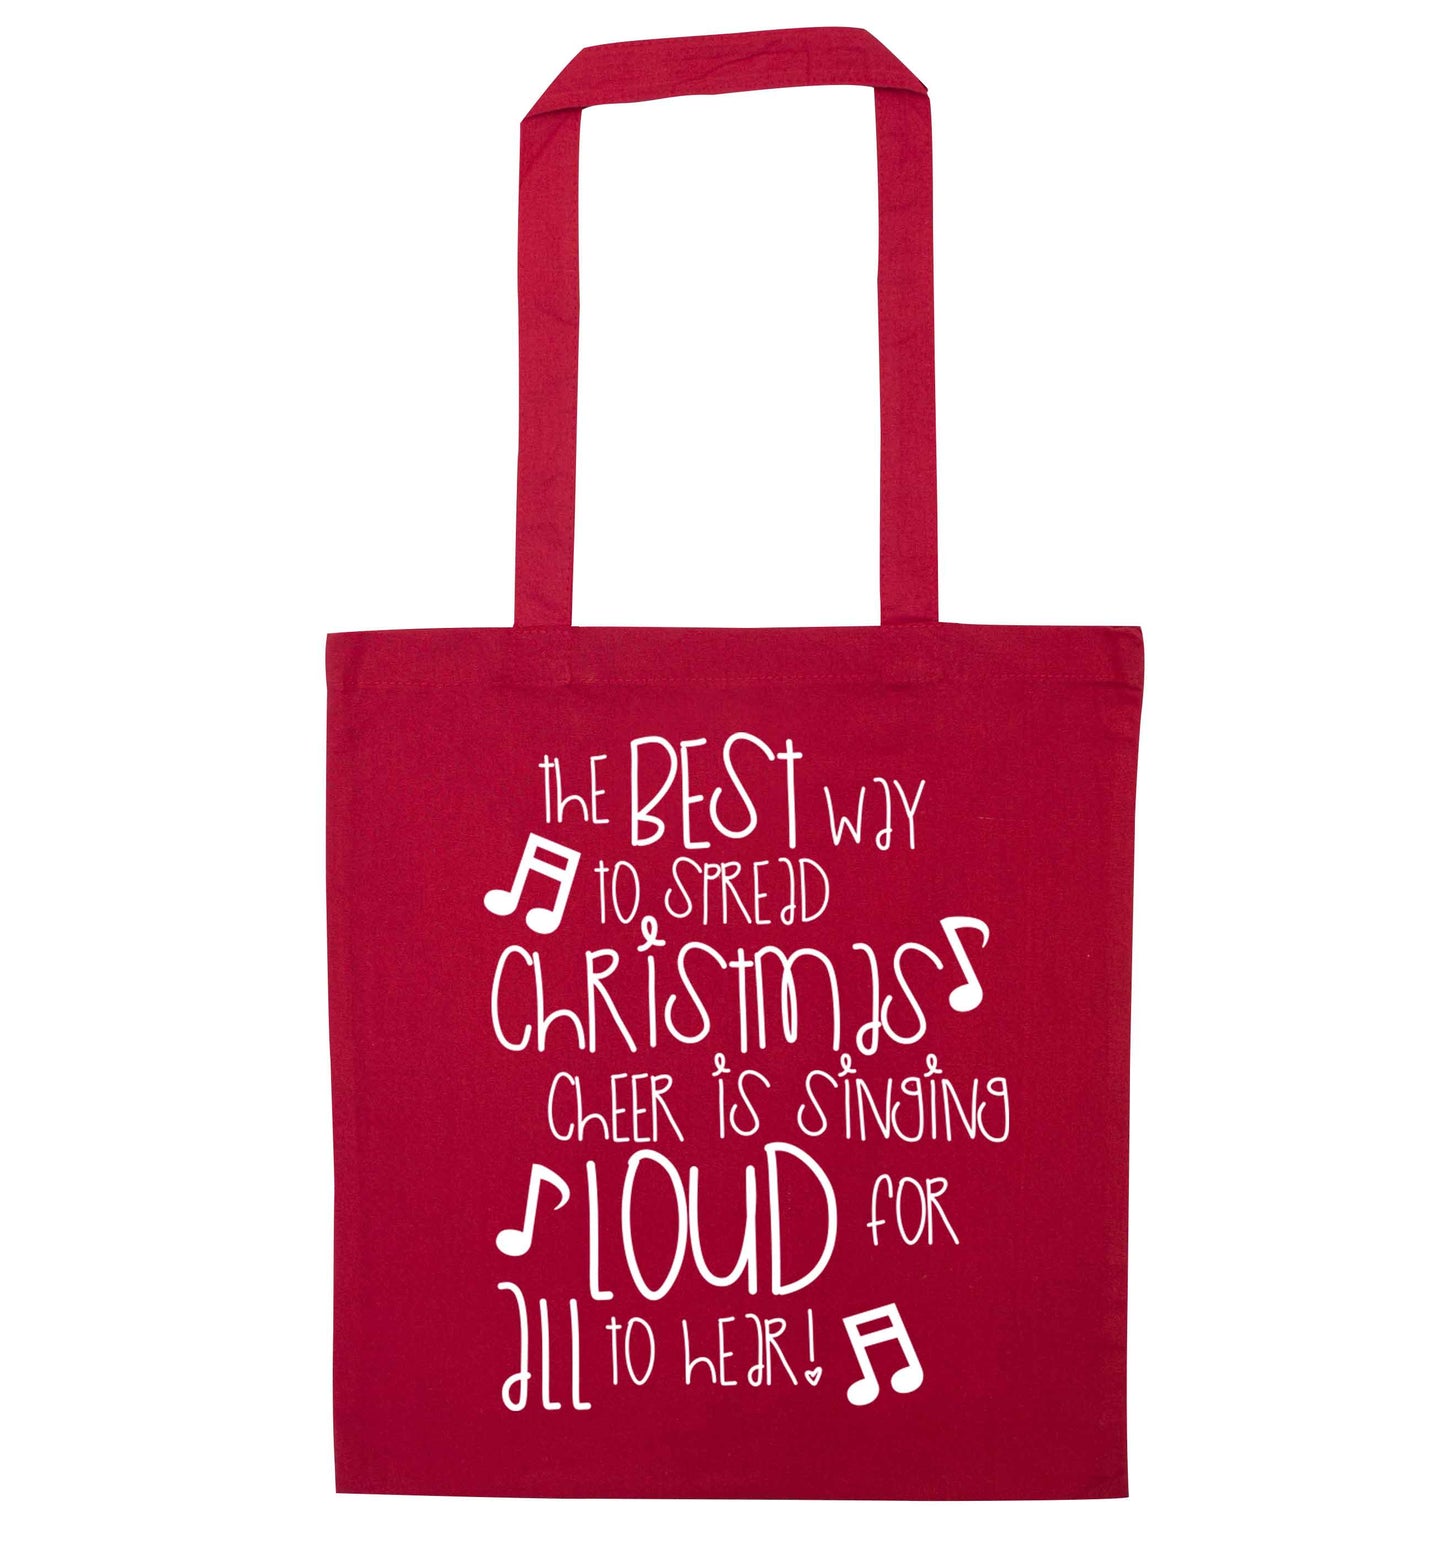 The best way to spread Christmas cheer is singing loud for all to hear red tote bag